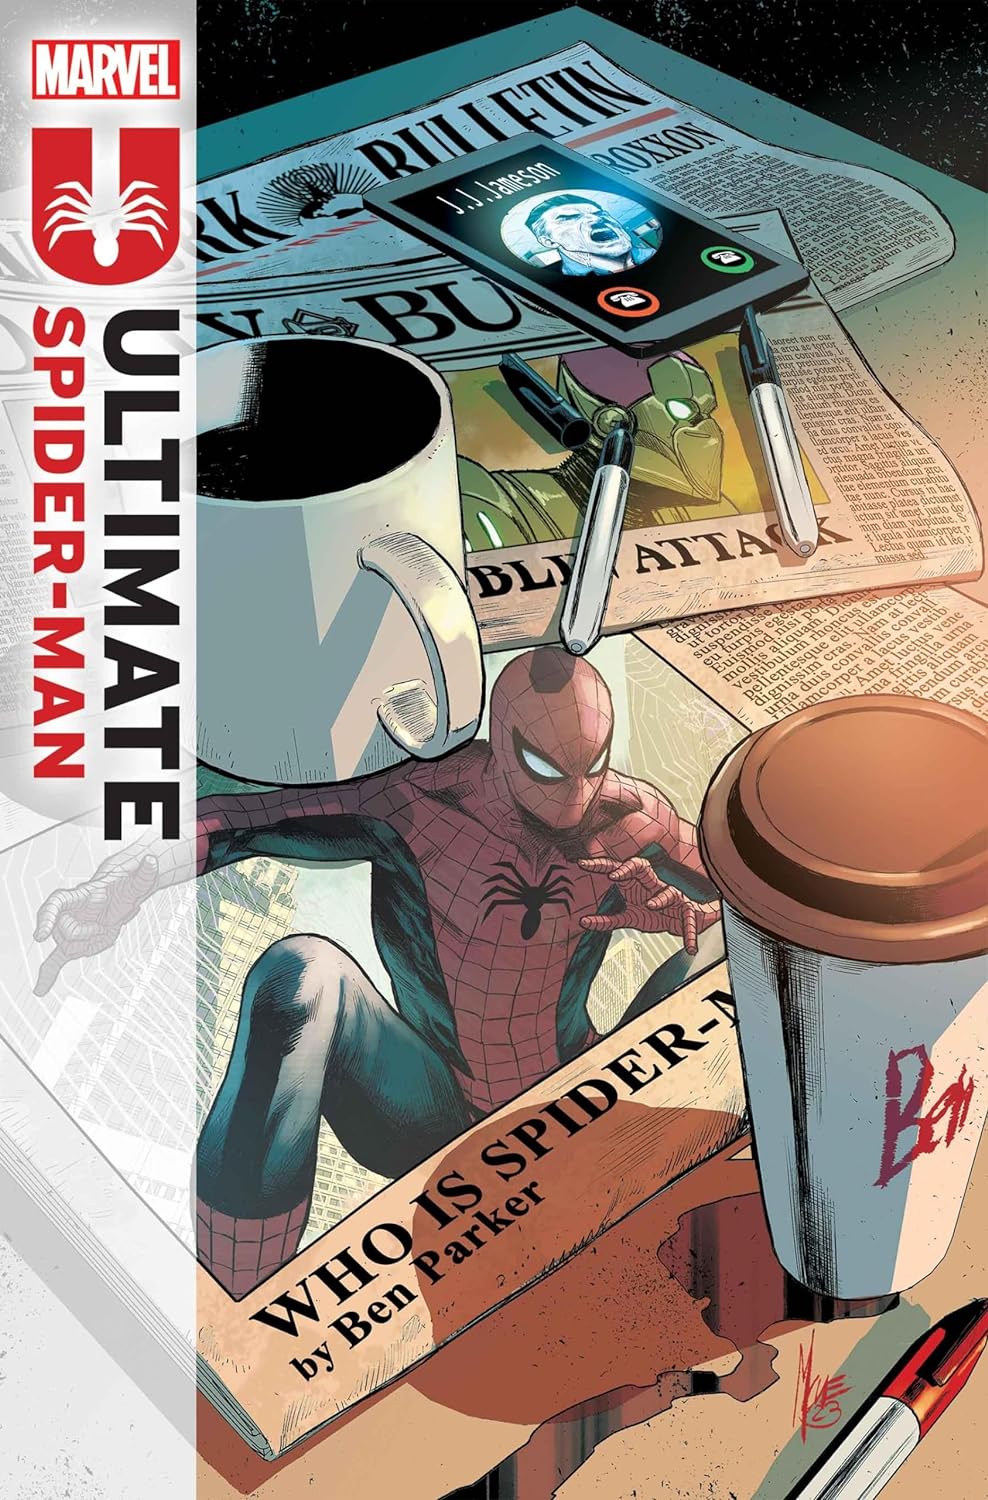 Ultimate Spider-Man #4 cover art